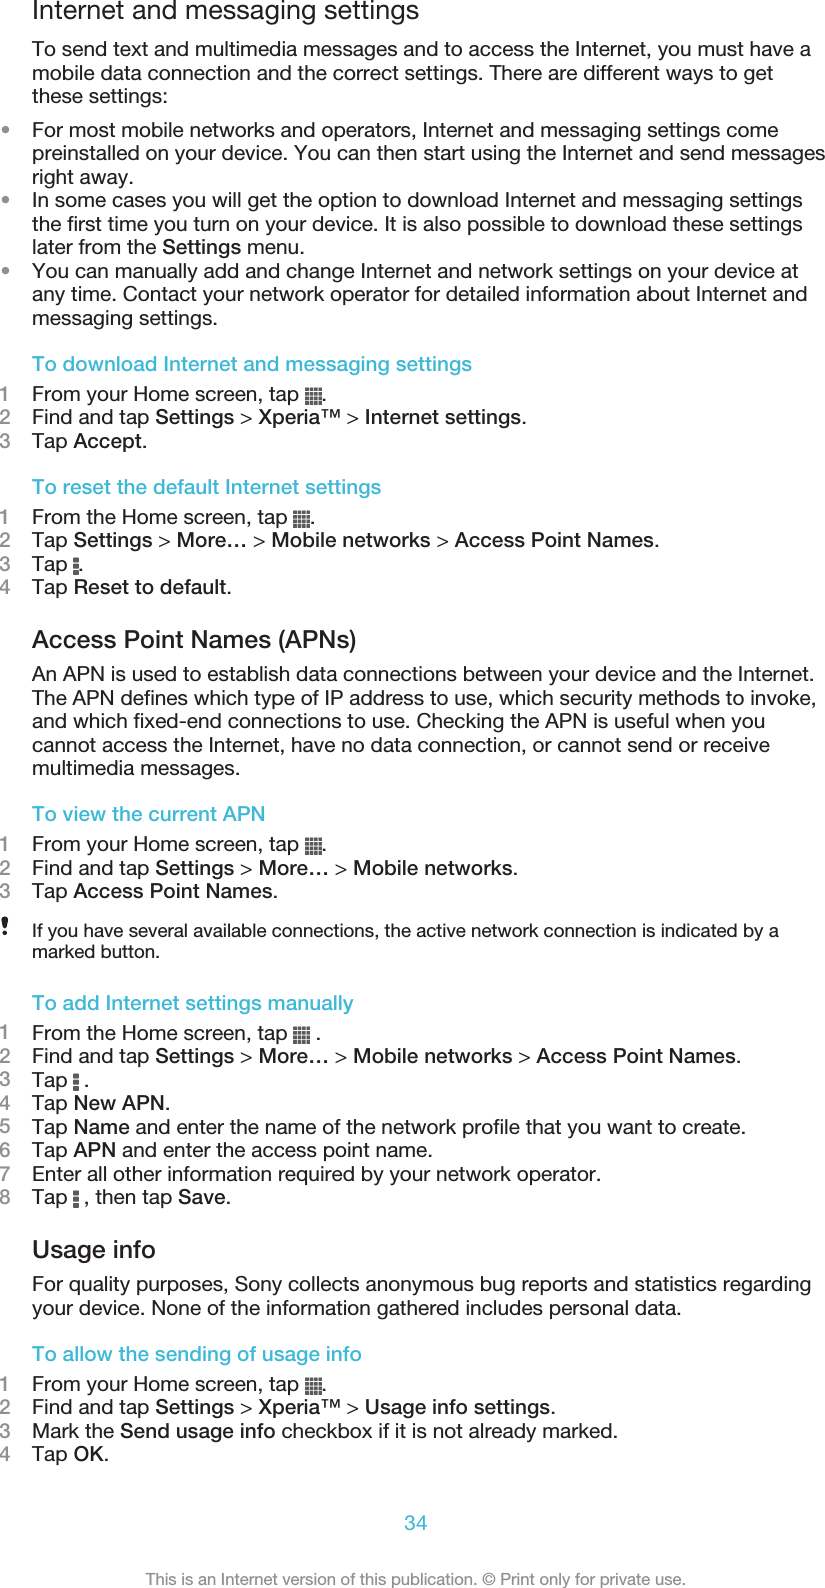 Internet and messaging settingsTo send text and multimedia messages and to access the Internet, you must have amobile data connection and the correct settings. There are different ways to getthese settings:•For most mobile networks and operators, Internet and messaging settings comepreinstalled on your device. You can then start using the Internet and send messagesright away.•In some cases you will get the option to download Internet and messaging settingsthe first time you turn on your device. It is also possible to download these settingslater from the Settings menu.•You can manually add and change Internet and network settings on your device atany time. Contact your network operator for detailed information about Internet andmessaging settings.To download Internet and messaging settings1From your Home screen, tap  .2Find and tap Settings &gt; Xperia™ &gt; Internet settings.3Tap Accept.To reset the default Internet settings1From the Home screen, tap  .2Tap Settings &gt; More… &gt; Mobile networks &gt; Access Point Names.3Tap  .4Tap Reset to default.Access Point Names (APNs)An APN is used to establish data connections between your device and the Internet.The APN defines which type of IP address to use, which security methods to invoke,and which fixed-end connections to use. Checking the APN is useful when youcannot access the Internet, have no data connection, or cannot send or receivemultimedia messages.To view the current APN1From your Home screen, tap  .2Find and tap Settings &gt; More… &gt; Mobile networks.3Tap Access Point Names.If you have several available connections, the active network connection is indicated by amarked button.To add Internet settings manually1From the Home screen, tap   .2Find and tap Settings &gt; More… &gt; Mobile networks &gt; Access Point Names.3Tap   .4Tap New APN.5Tap Name and enter the name of the network profile that you want to create.6Tap APN and enter the access point name.7Enter all other information required by your network operator.8Tap   , then tap Save.Usage infoFor quality purposes, Sony collects anonymous bug reports and statistics regardingyour device. None of the information gathered includes personal data.To allow the sending of usage info1From your Home screen, tap  .2Find and tap Settings &gt; Xperia™ &gt; Usage info settings.3Mark the Send usage info checkbox if it is not already marked.4Tap OK.34This is an Internet version of this publication. © Print only for private use.